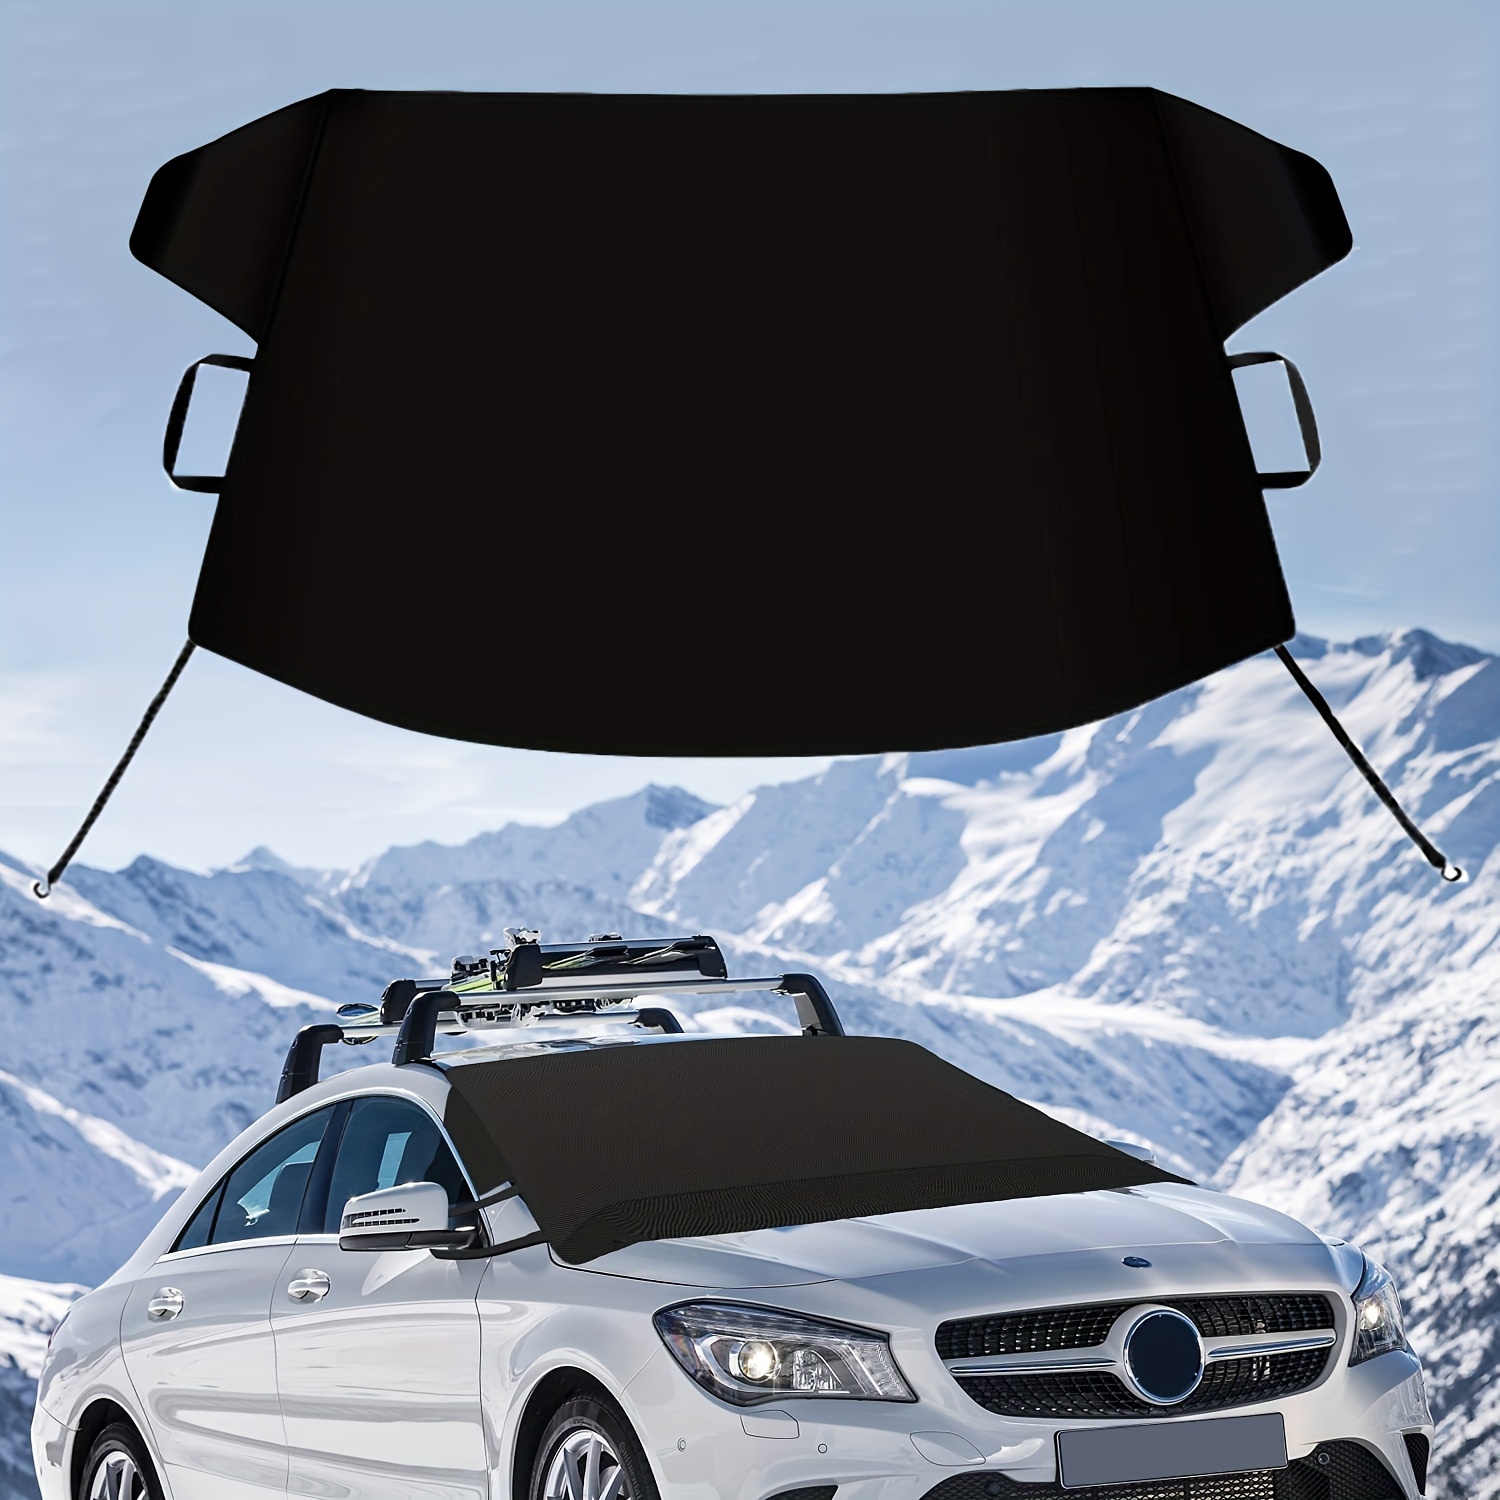  Arecwy Windshield Snow Cover, Windshield Cover for Ice